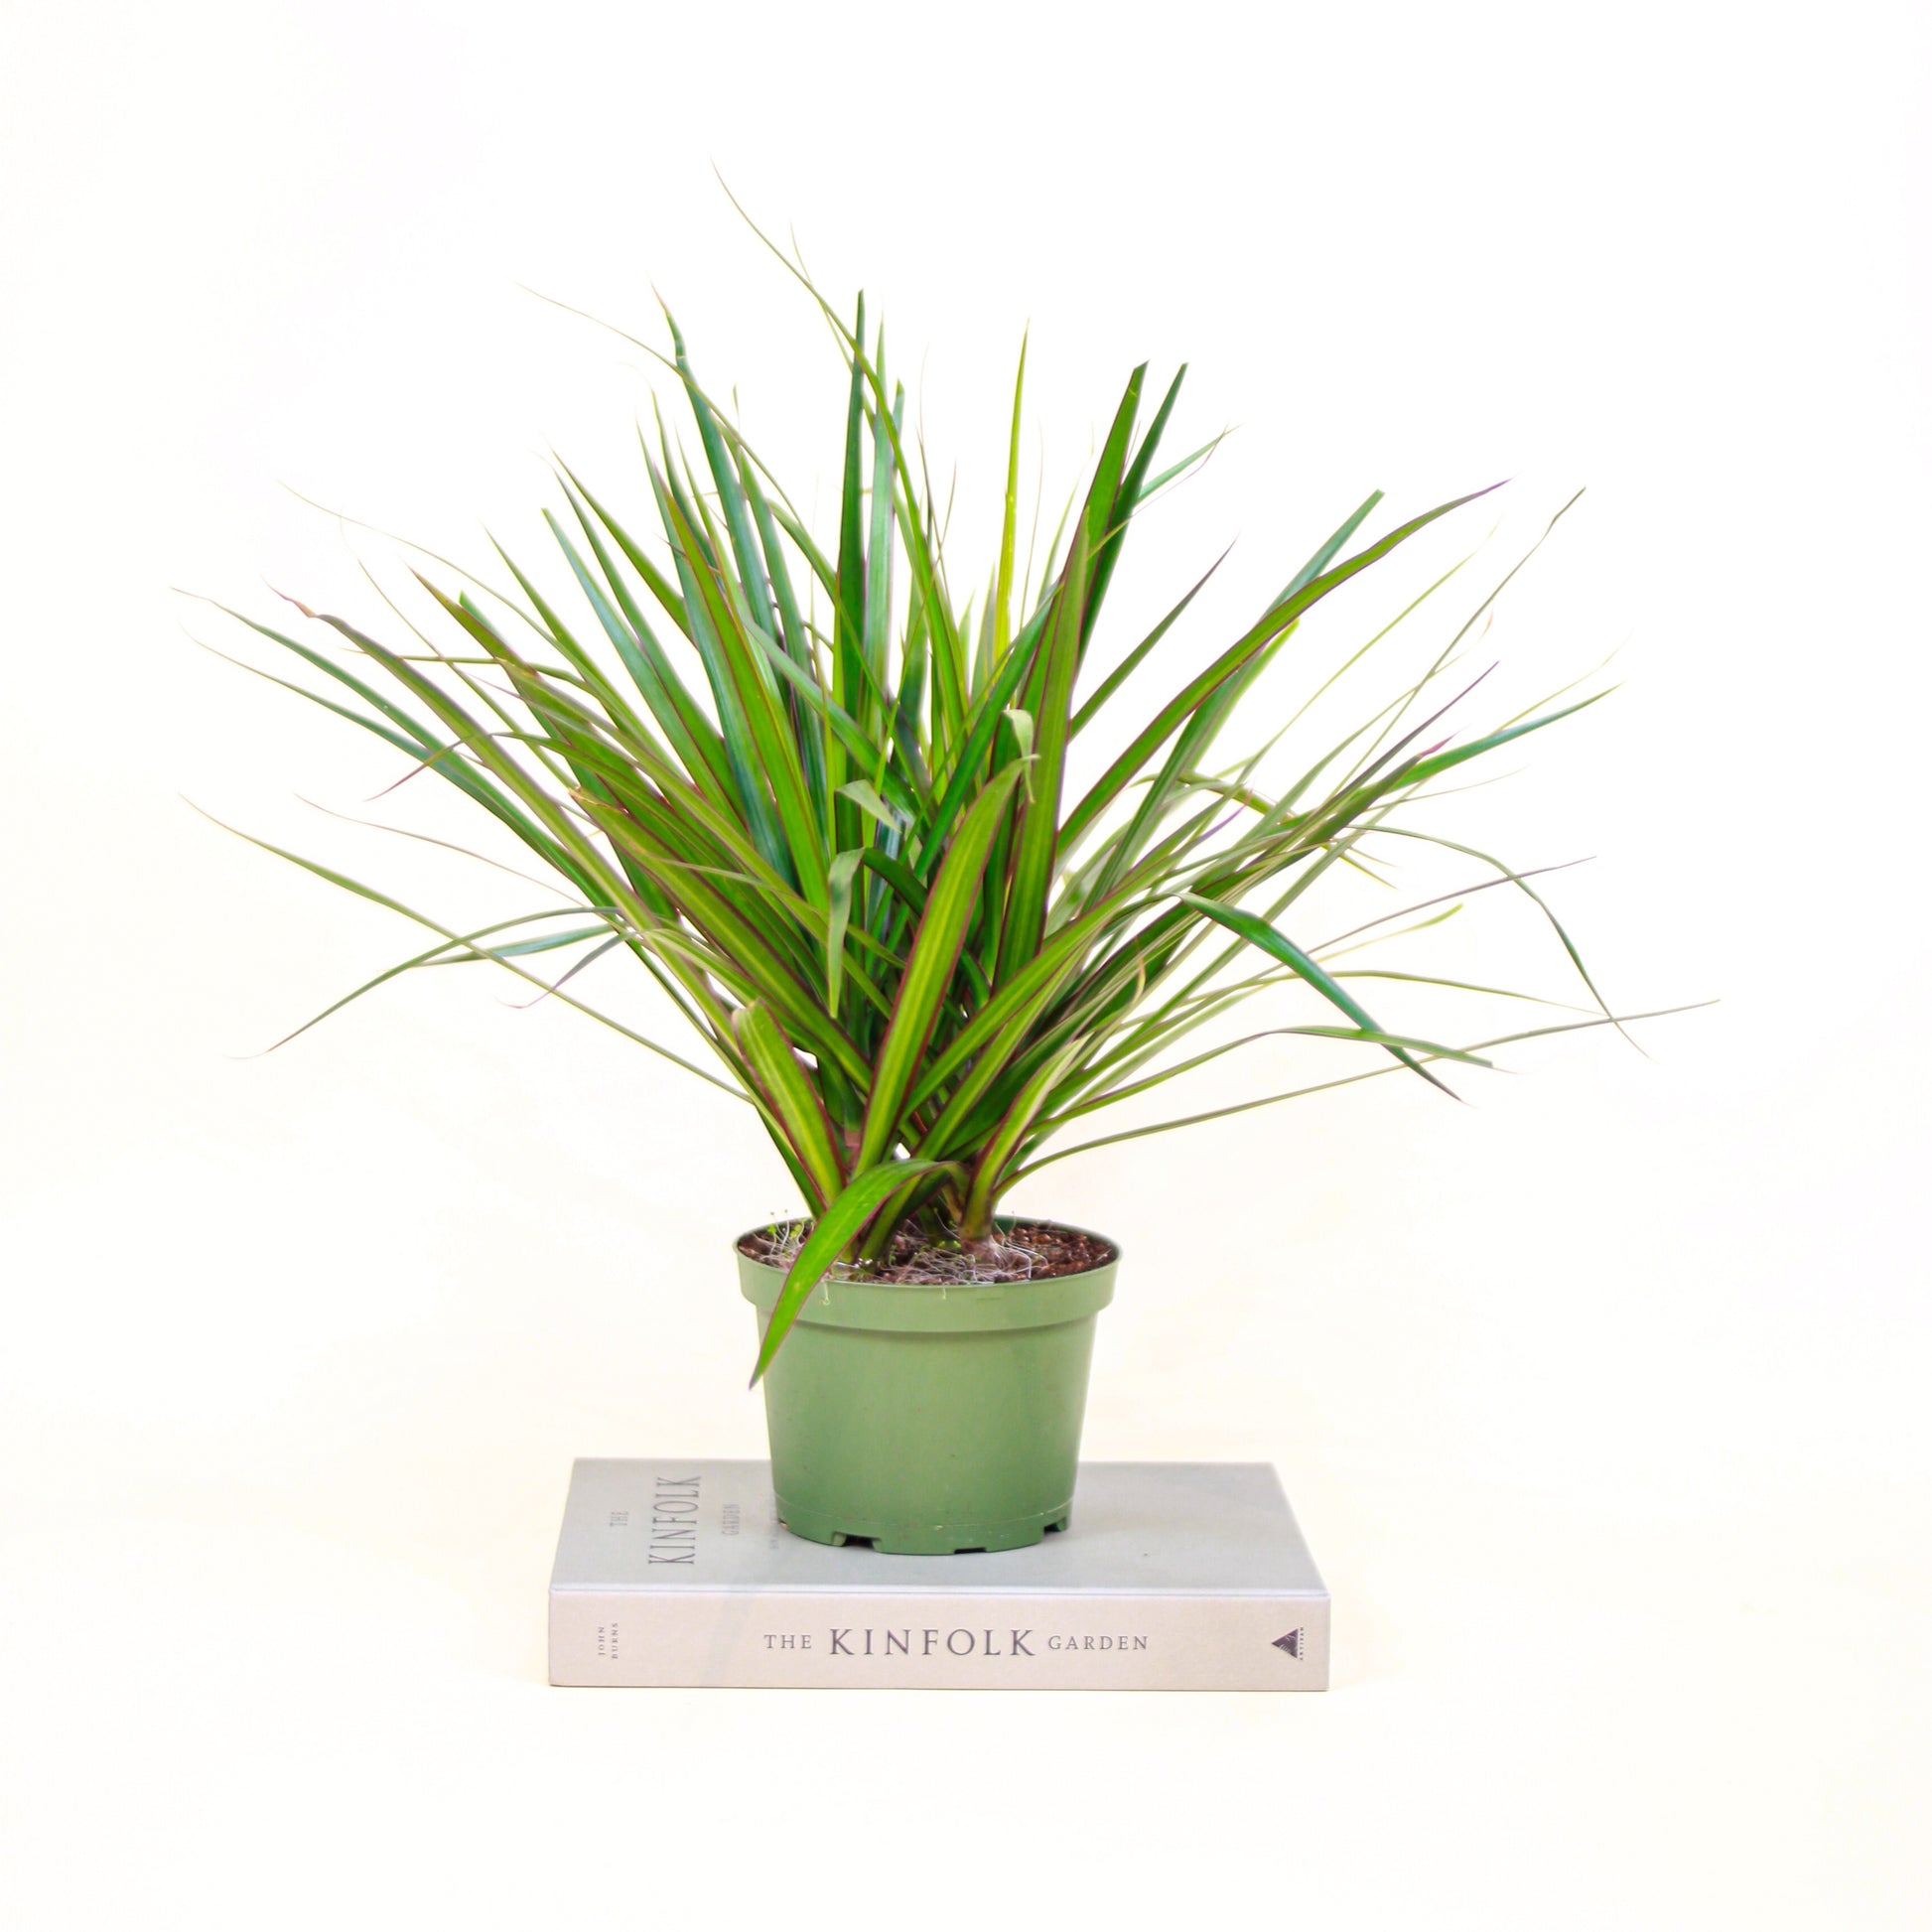 Aboera, Dracaena (Dracaena marginata) in a 6 inch pot. Indoor plant for sale by Promise Supply for delivery and pickup in Toronto